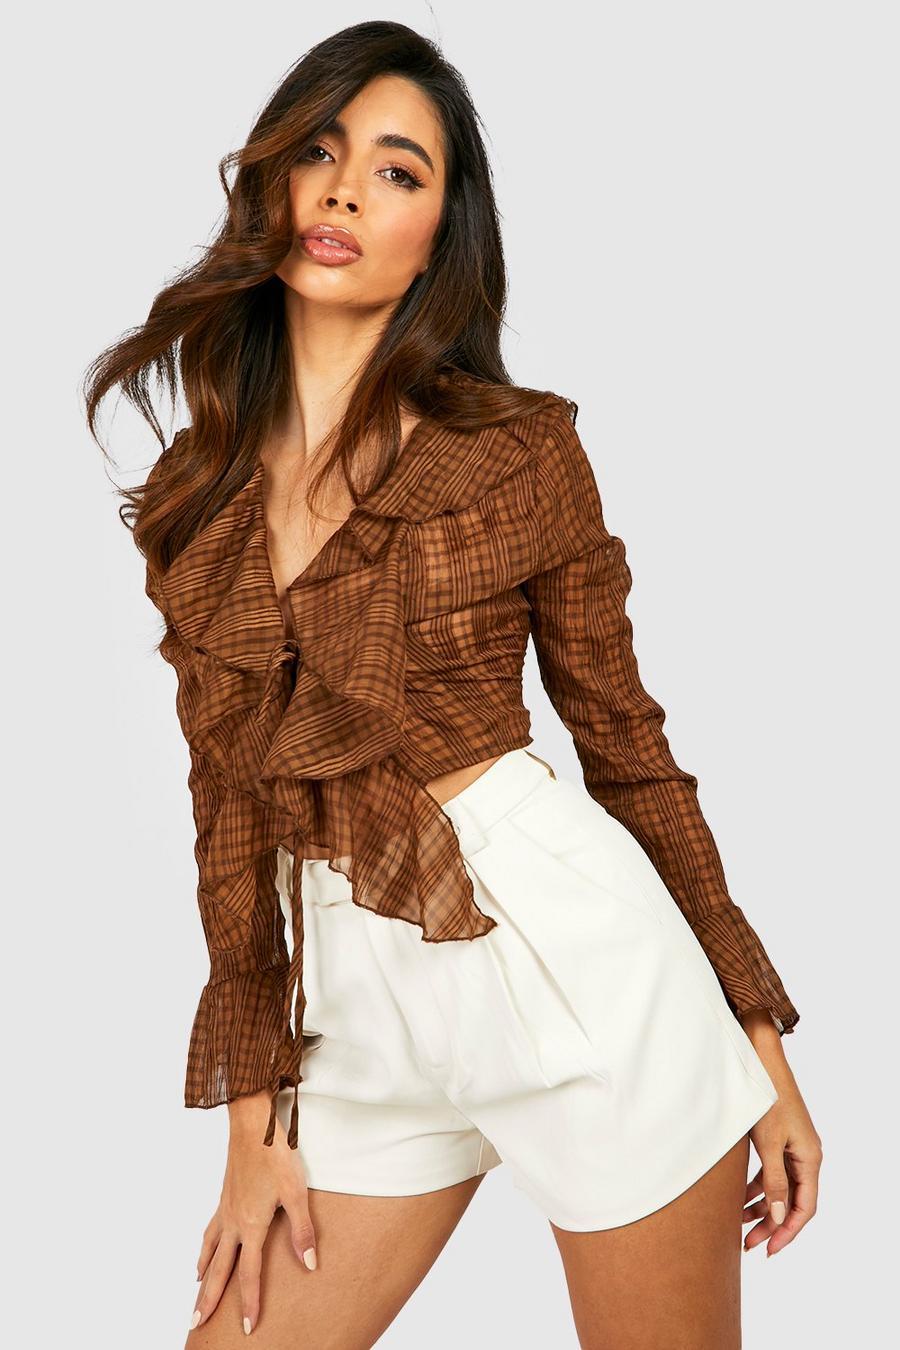 Chocolate brun Textured Ruffle Tie Detail Cropped Blouse Top